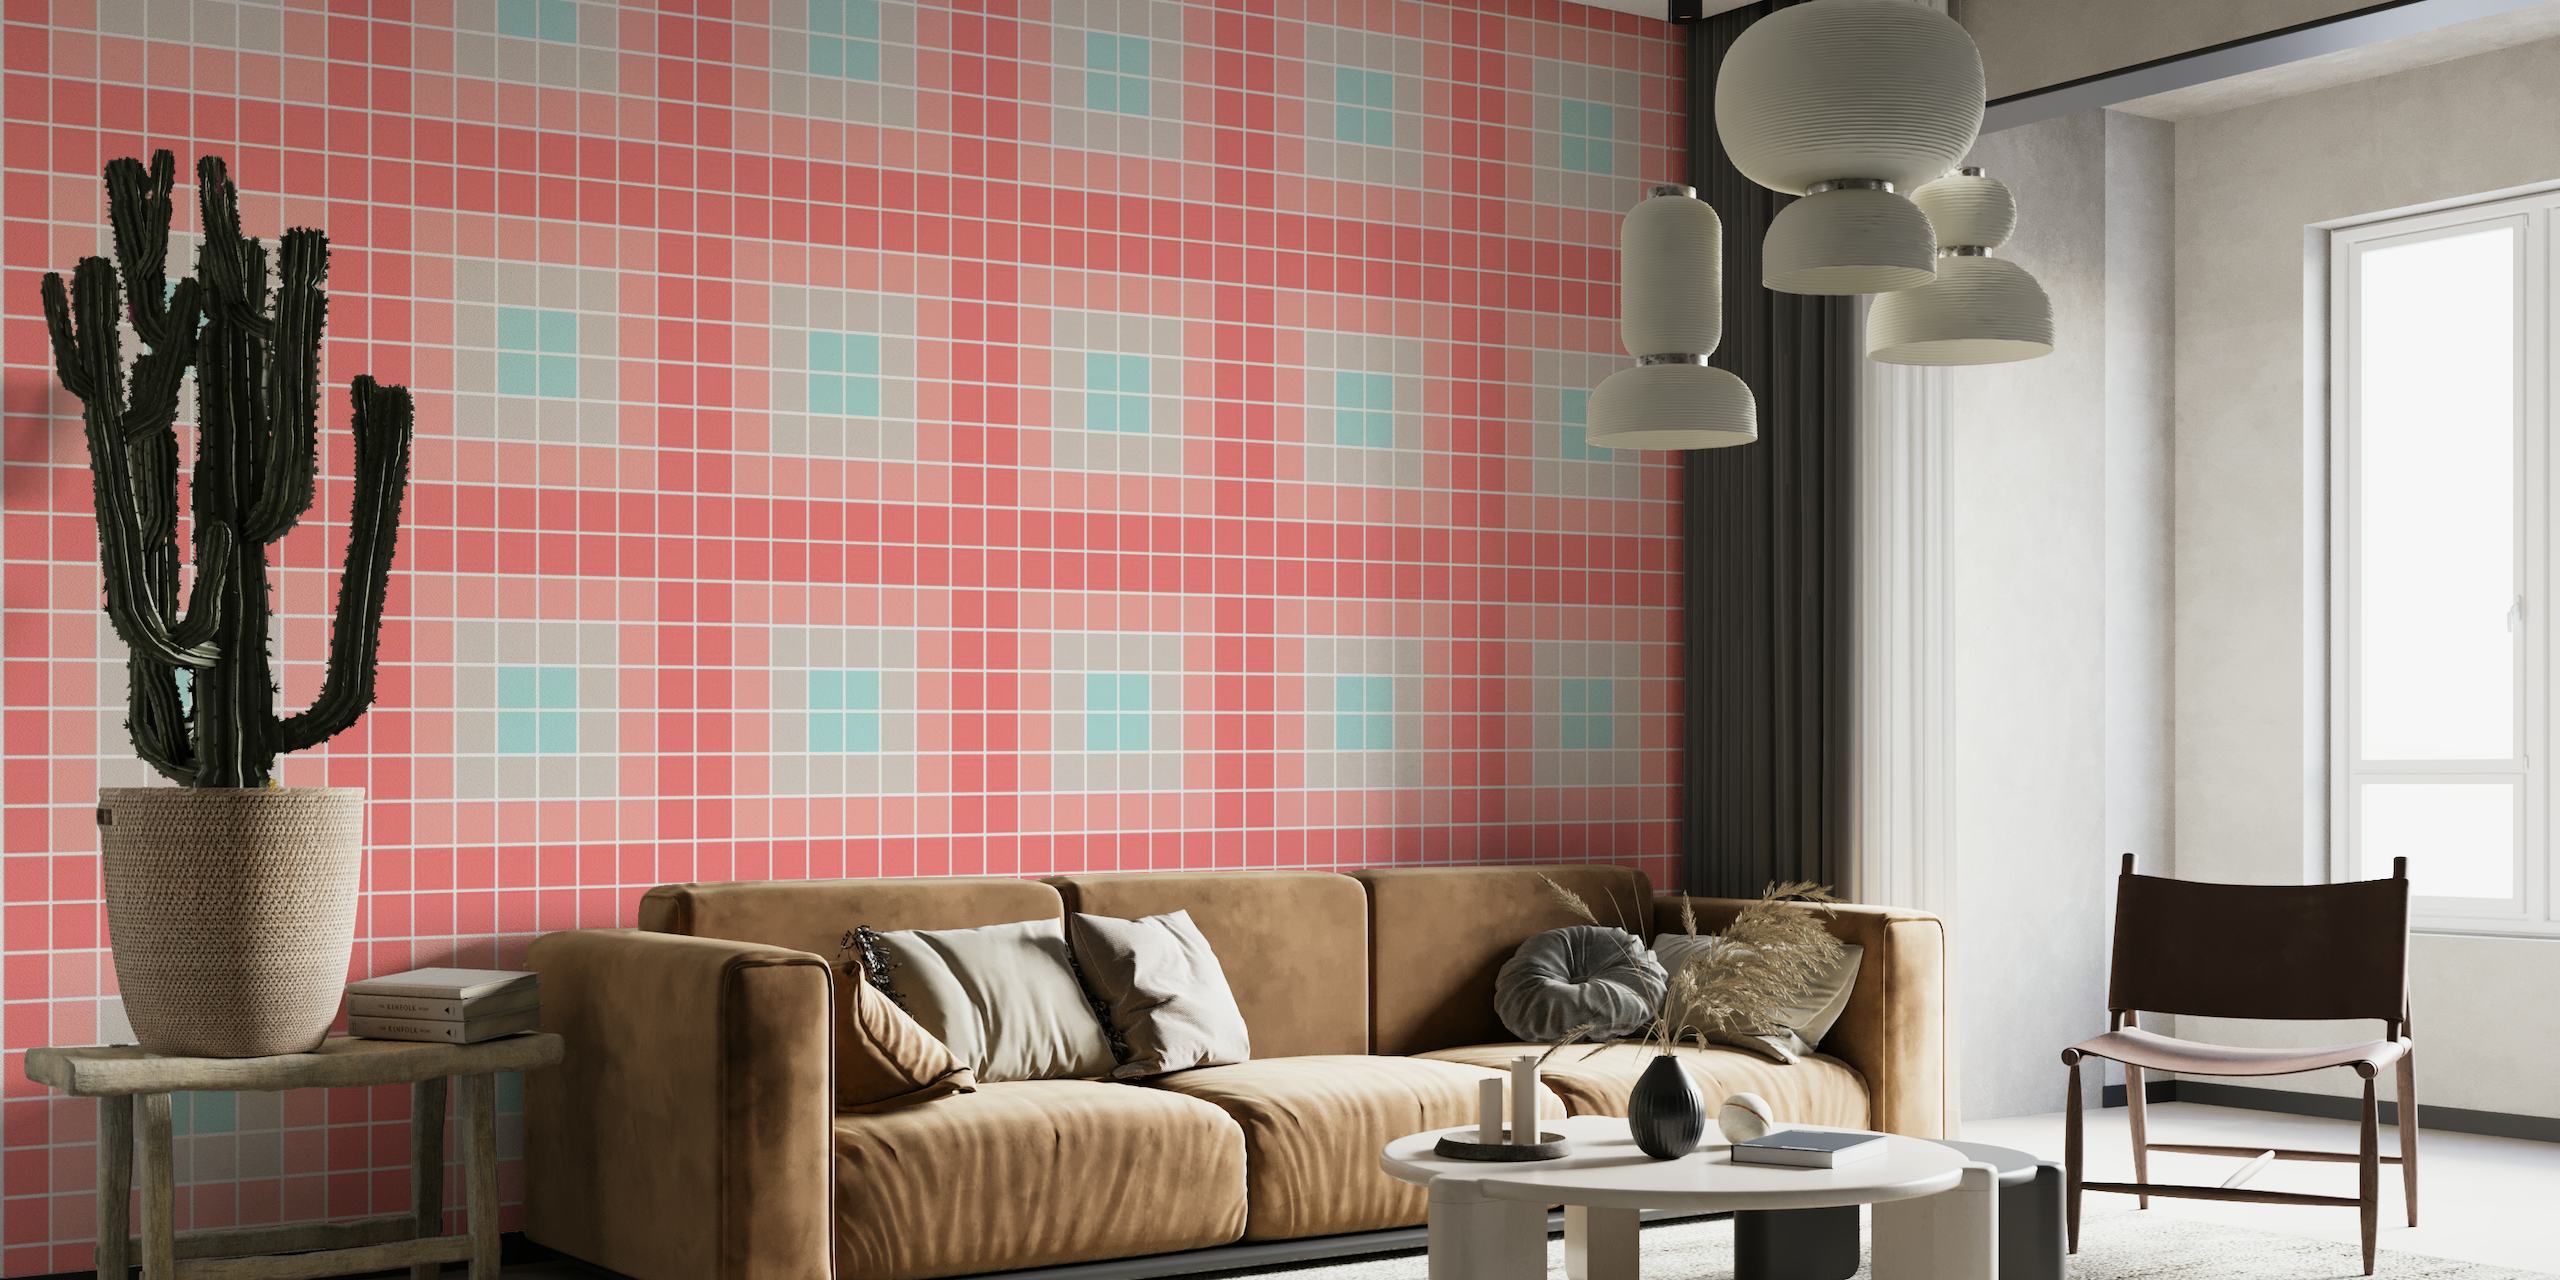 70s-style gradient squares wall mural with a central blue square